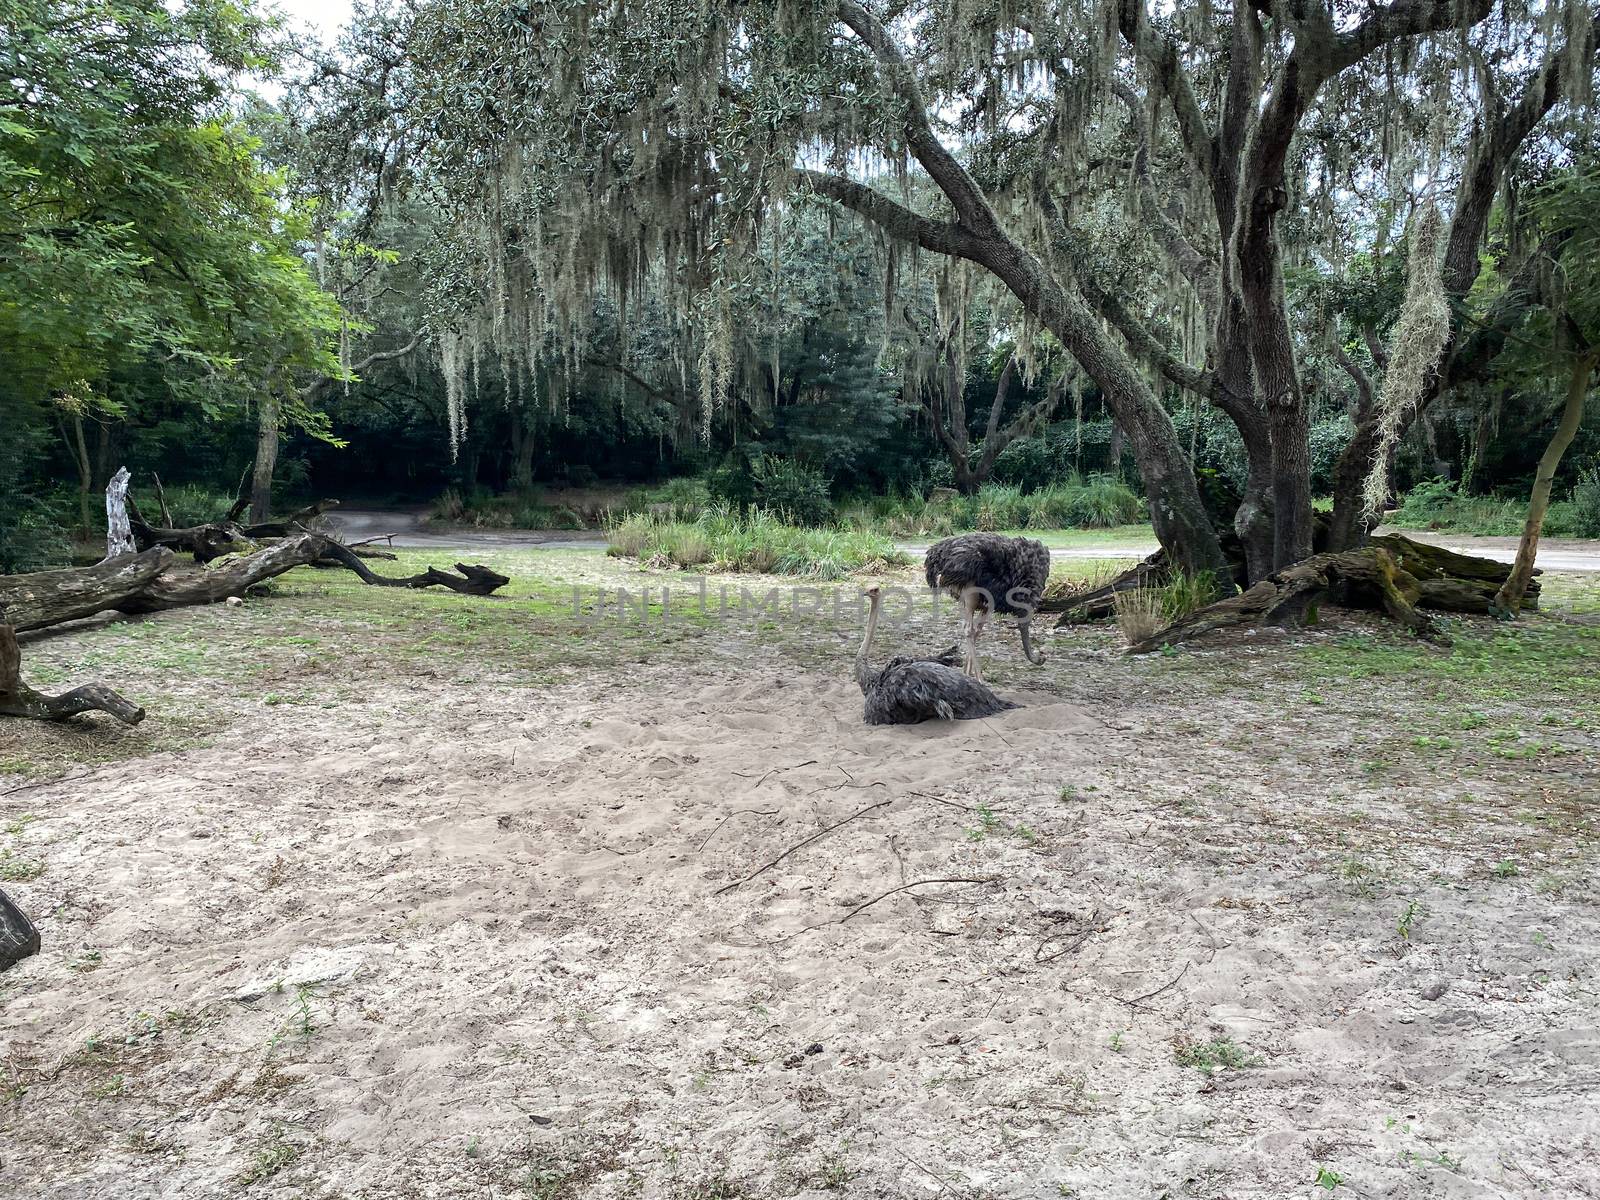 Two Ostriches hanging out at a zoo in Orlando, Florida.